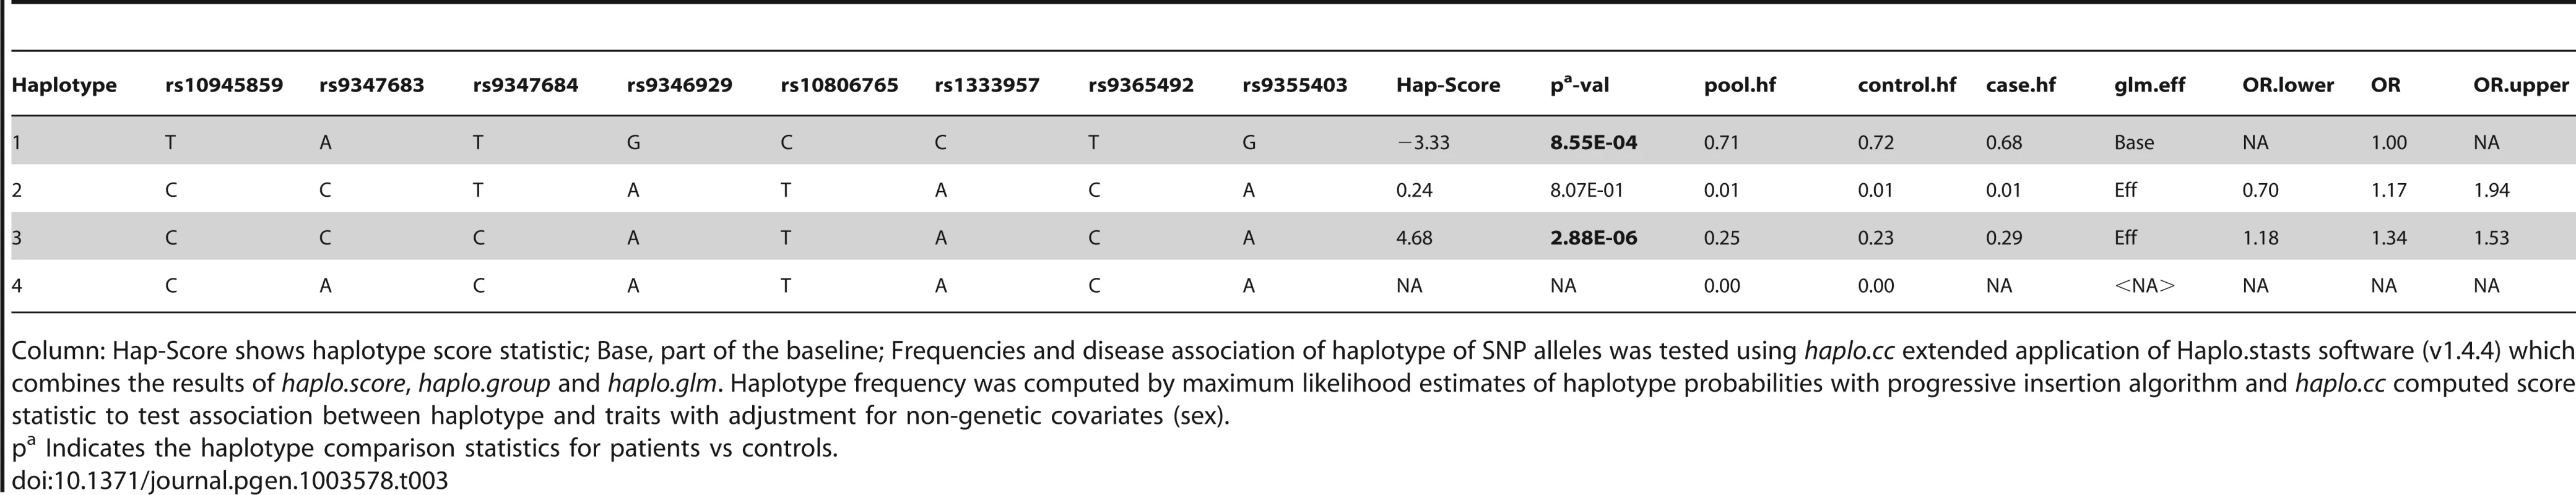 Haplotype structure, haplotype frequencies, significant <i>p</i> values and odds ratio between patients versus healthy controls of 8 SNPs representing BIN-1 of Indian population.